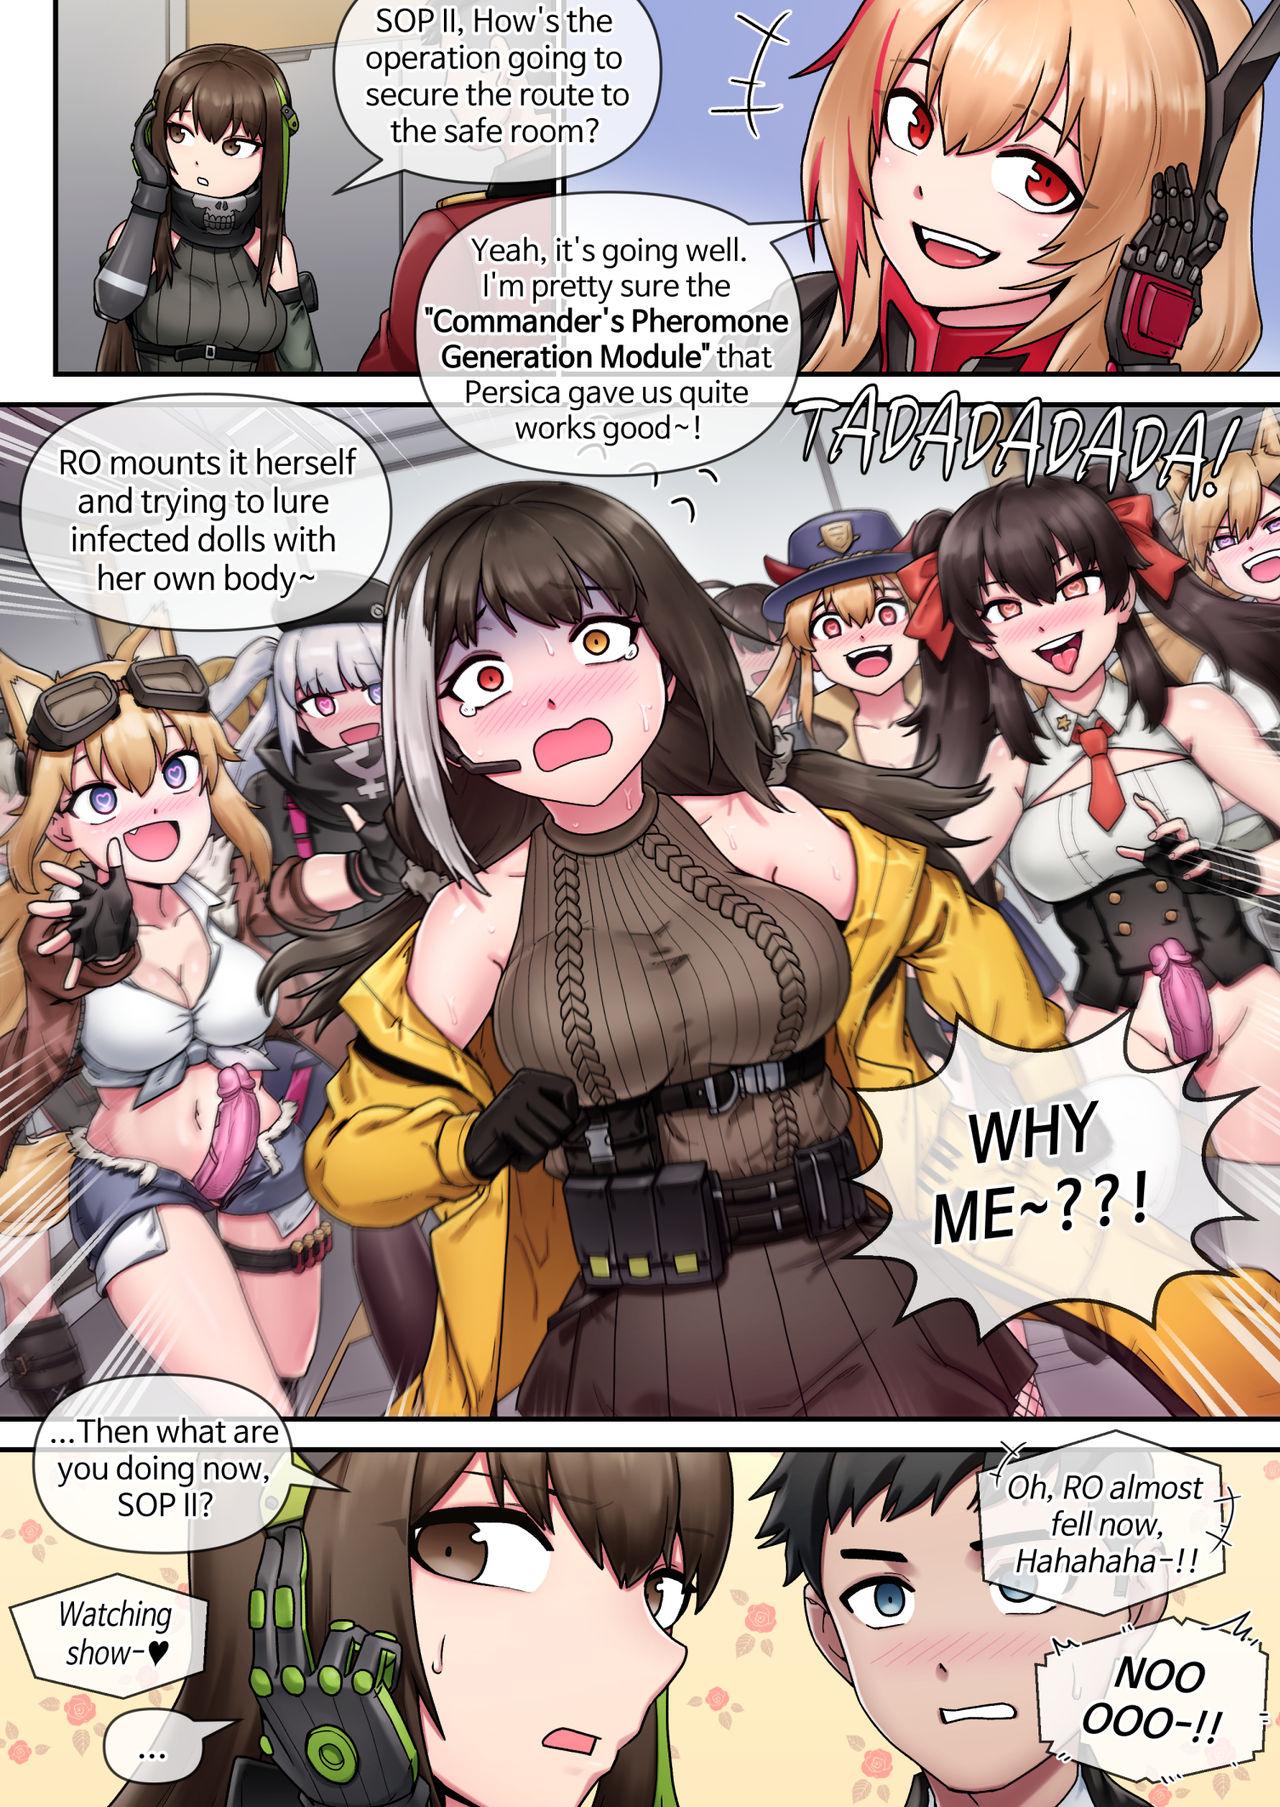 Stepbrother My Only Princess - Girls frontline Bulge - Page 5